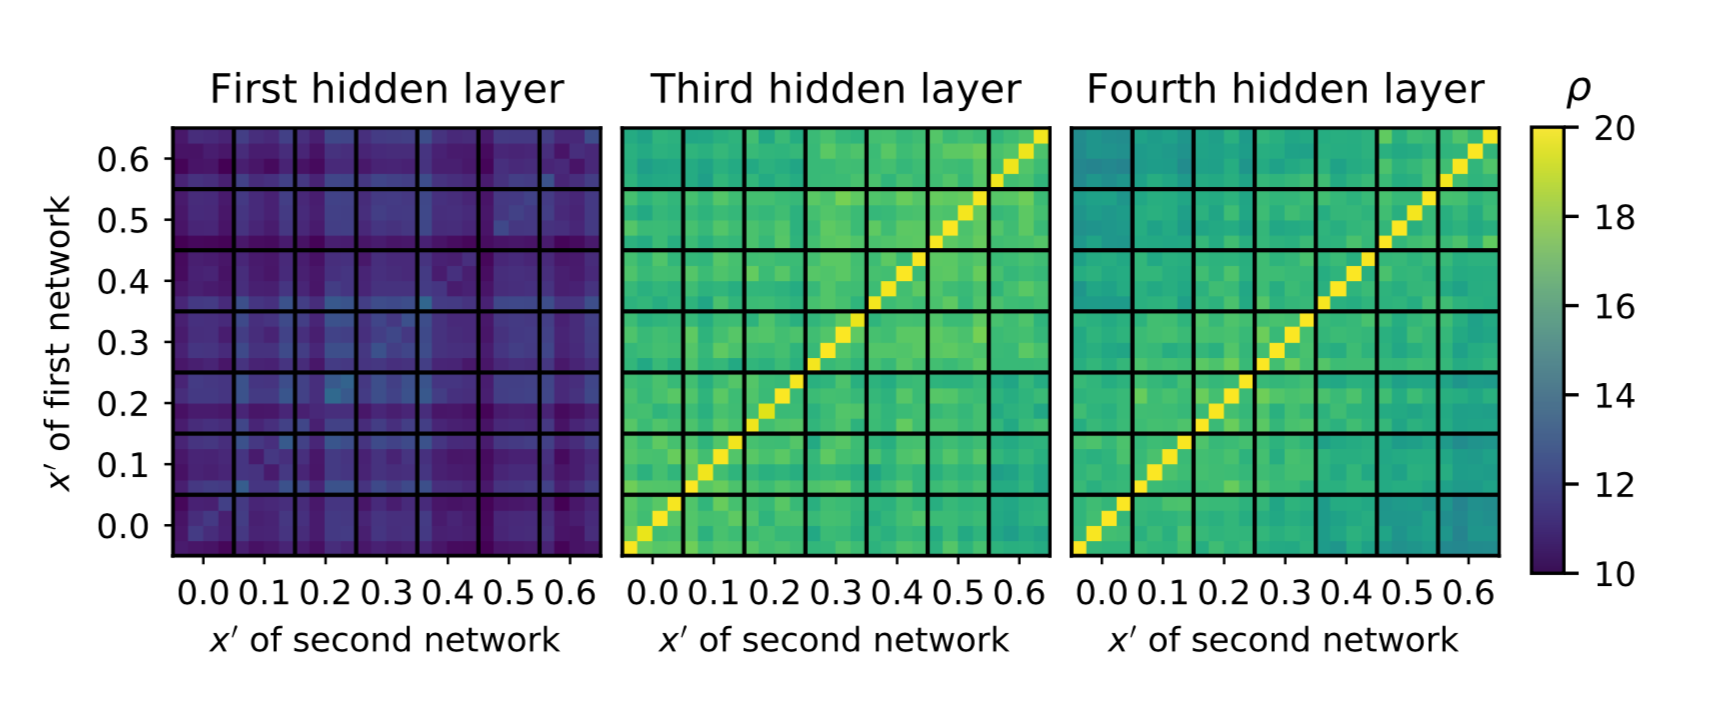 Matrices of layer-wise SVCCA similarities between the first, third, and fourth hidden layers of networks of width 20 trained at various x' values, with four random seeds per position. The black lines group layers on each axis by the x' values at which they were trained. For each x' value, the four entries correspond to four distinct random seeds. Thus the matrix diagonals contain self-similarities, the block diagonals formed by black lines contain similarities across random seeds at a fixed x', and the remaining entries correspond to comparisons between distinct x' values.